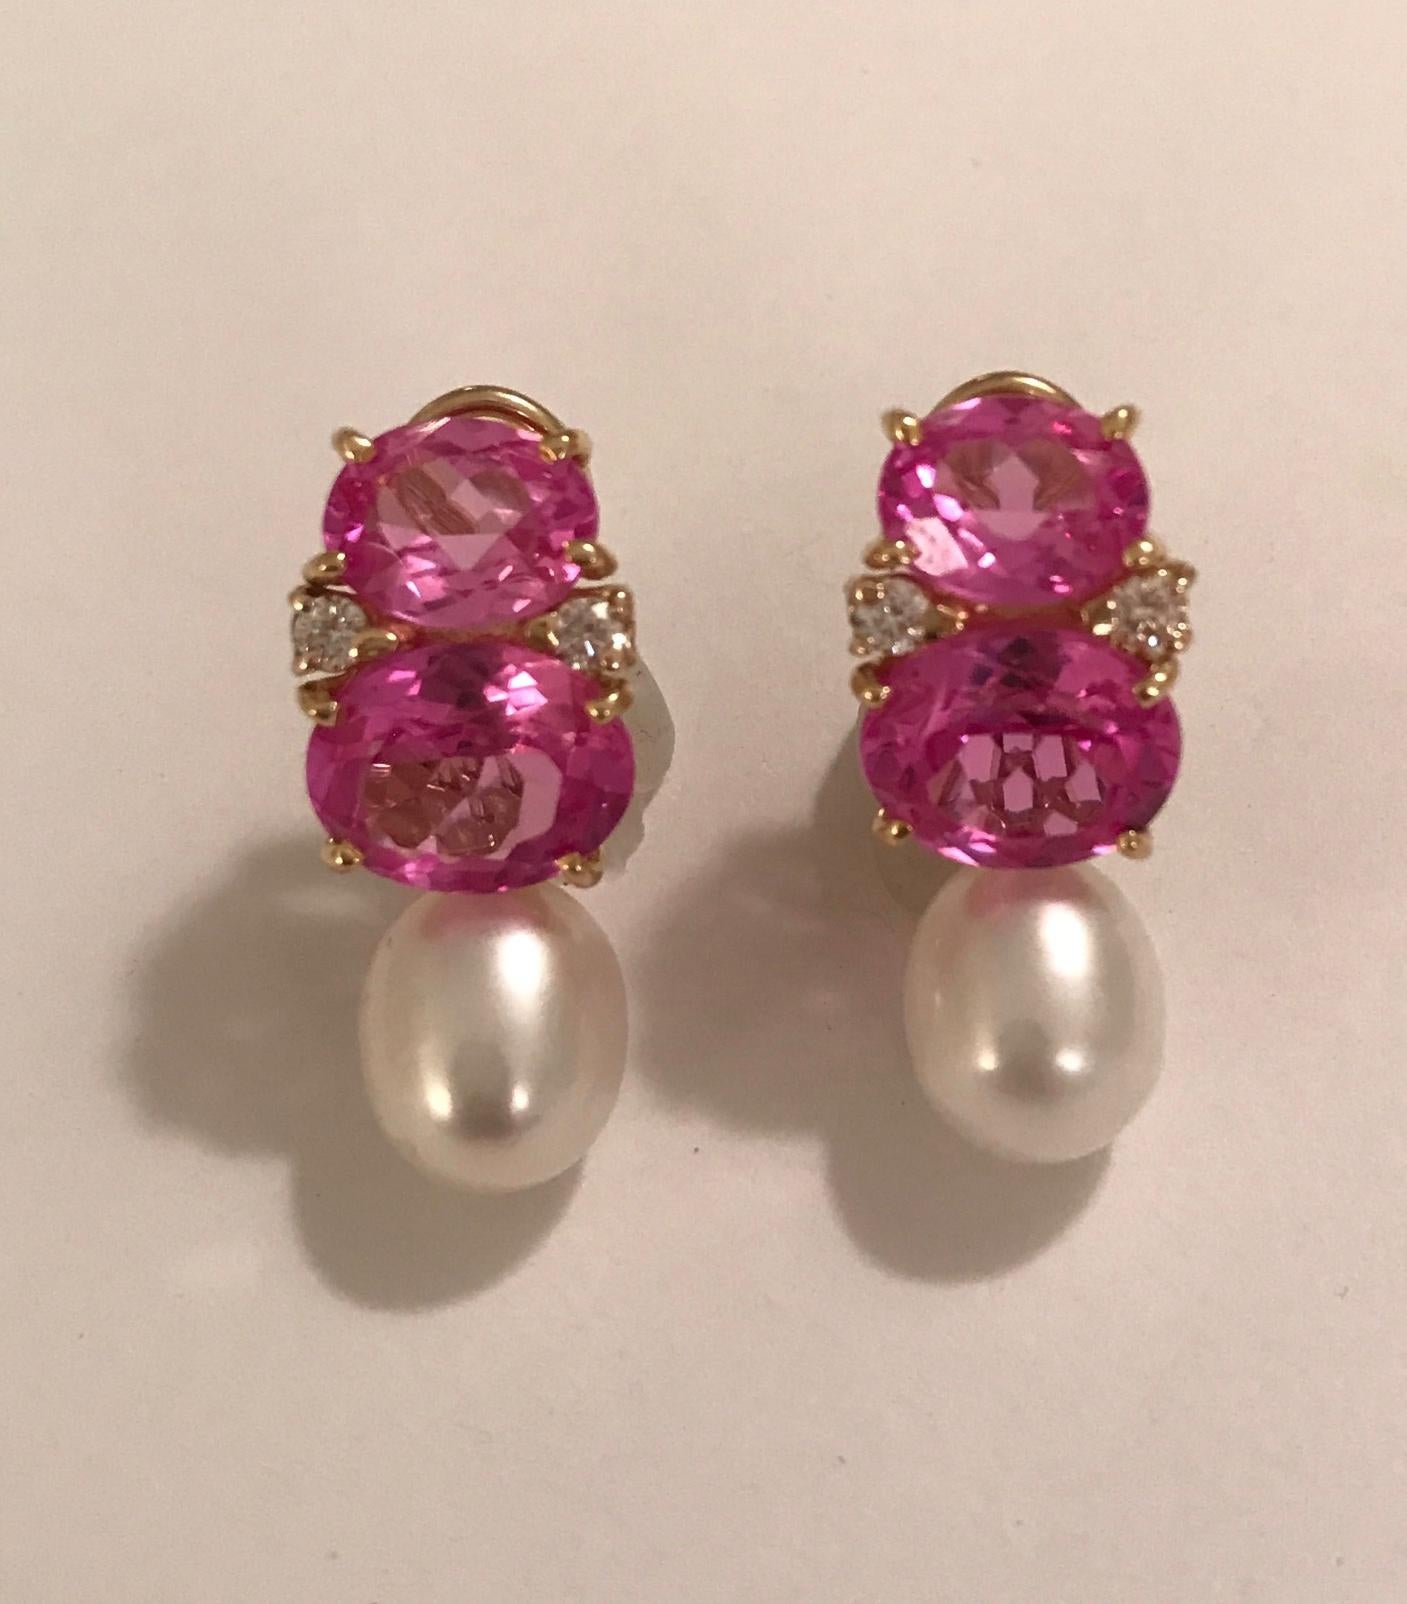 Medium Gum Drop Earrings with Pink Topaz Blue Topaz and Detachable Pearls For Sale 1